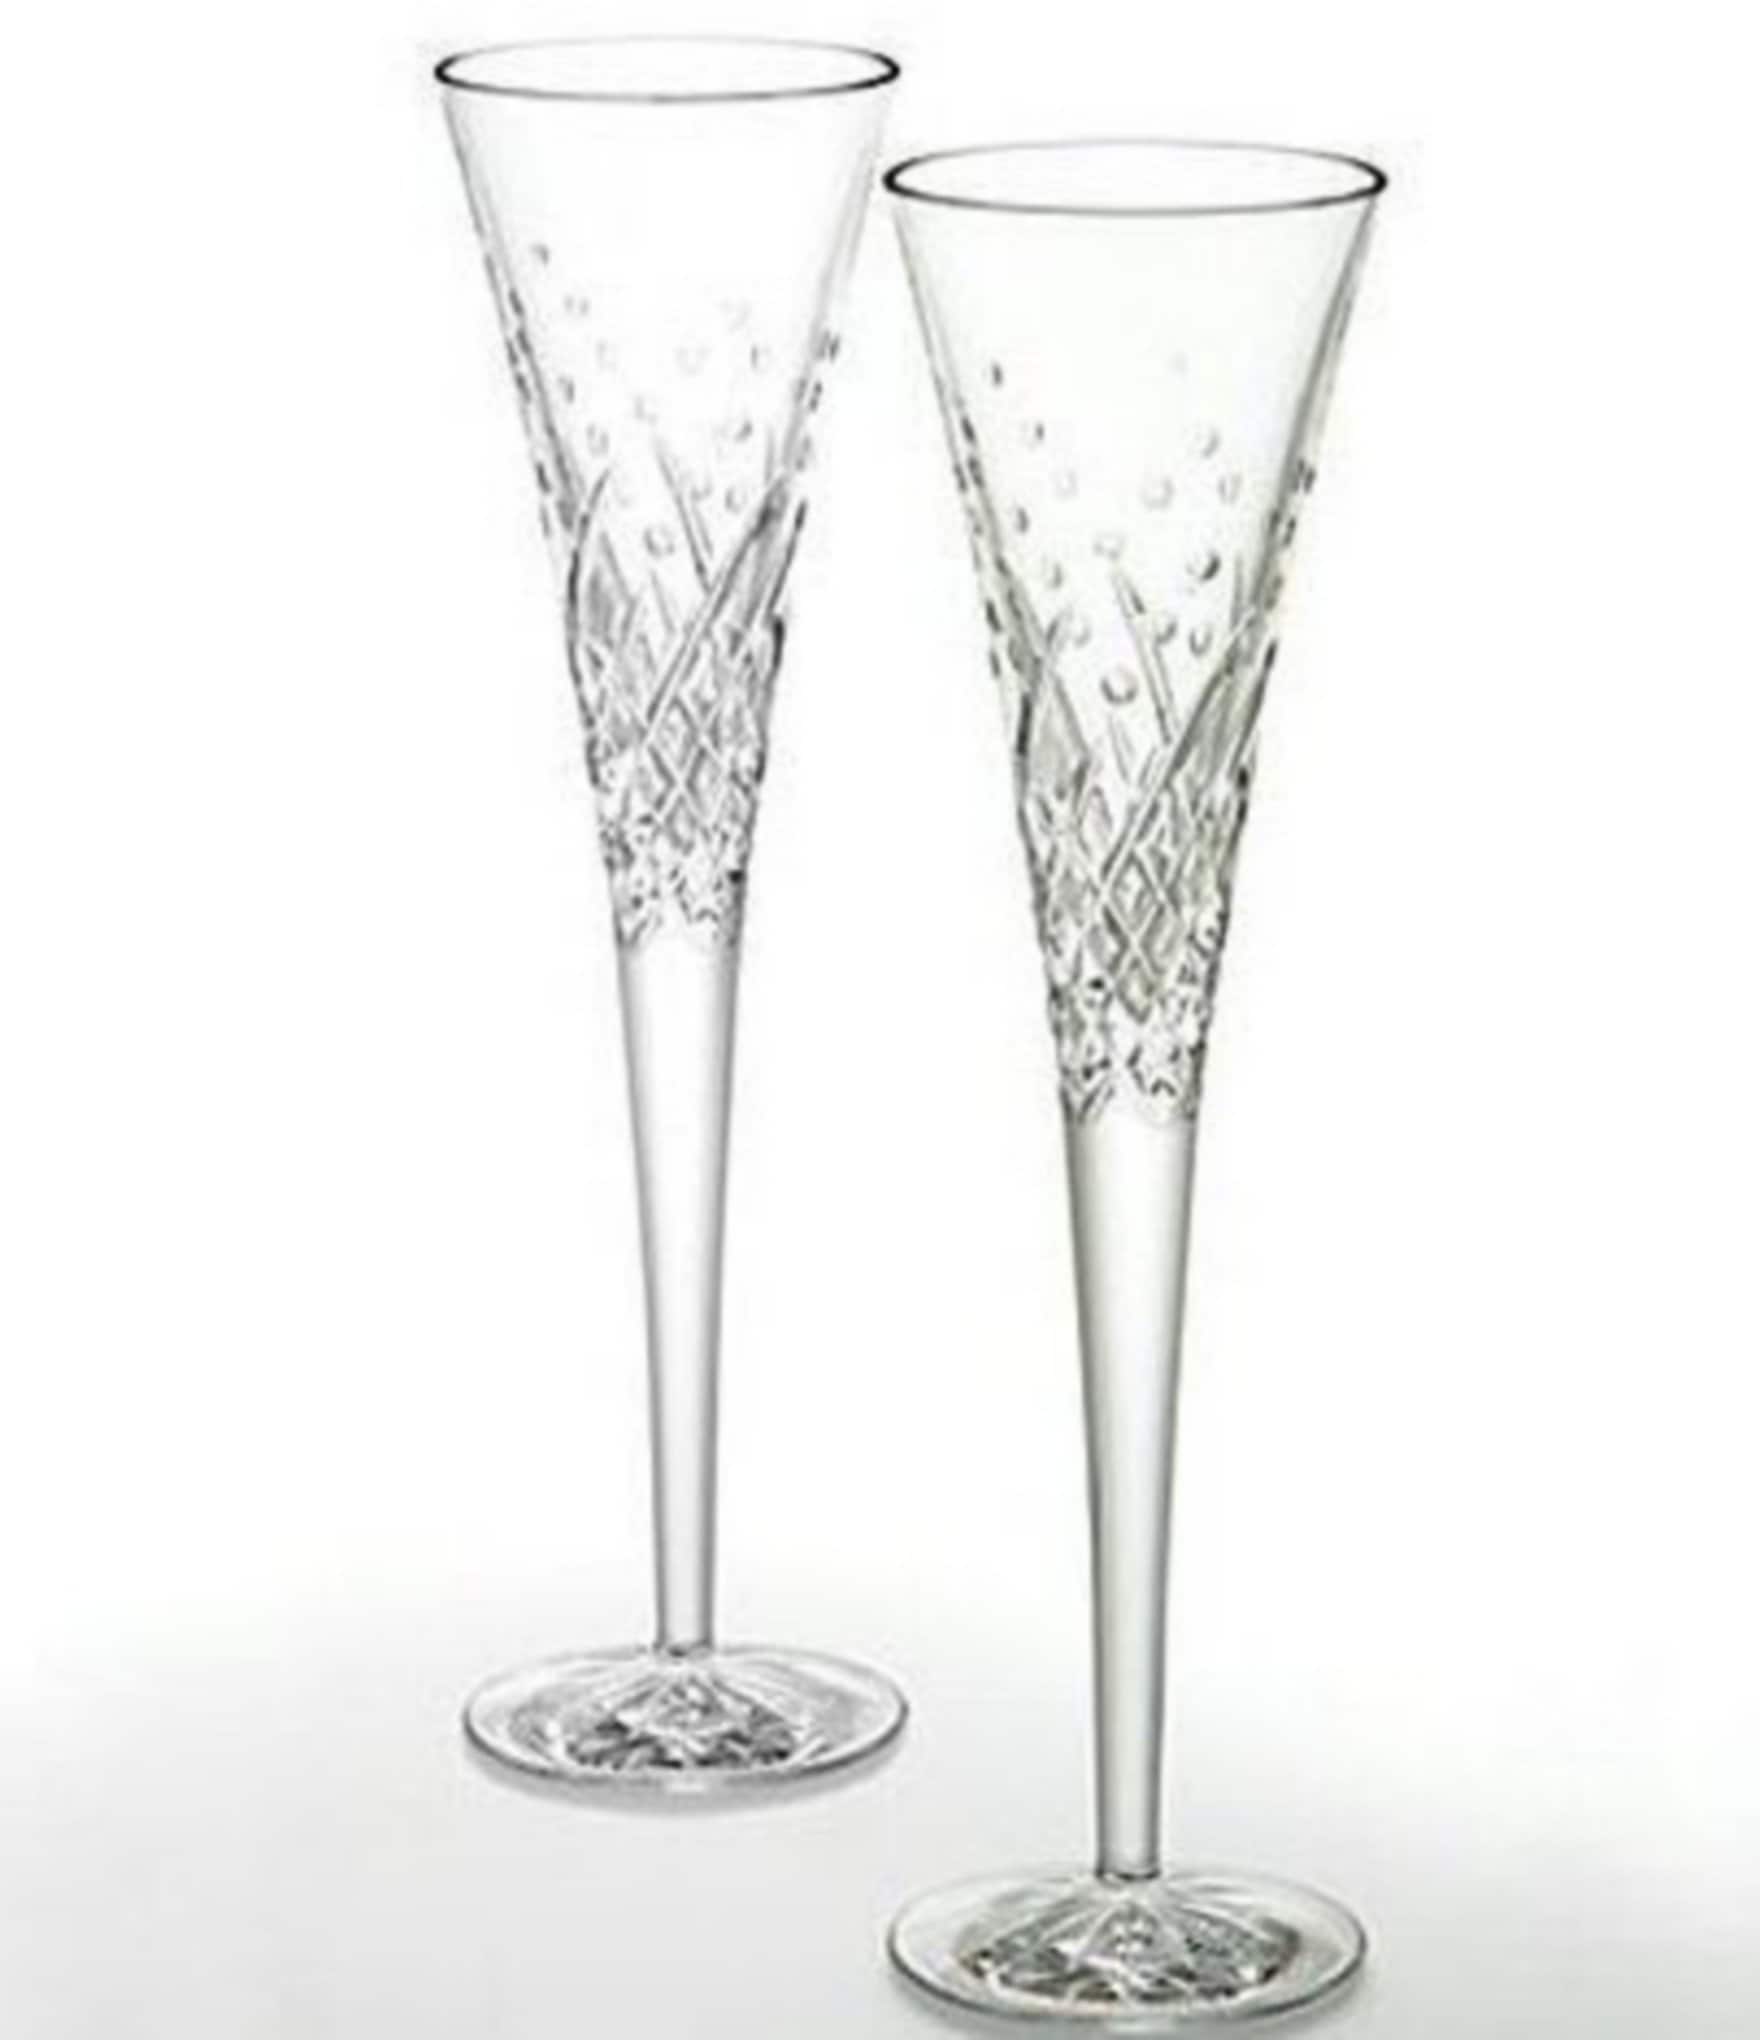 https://dimg.dillards.com/is/image/DillardsZoom/zoom/waterford-wishes-happy-celebrations-crystal-flute-pair/00000000_zi_76c1eac4-94e7-4877-aa87-c4527133bb92.jpg